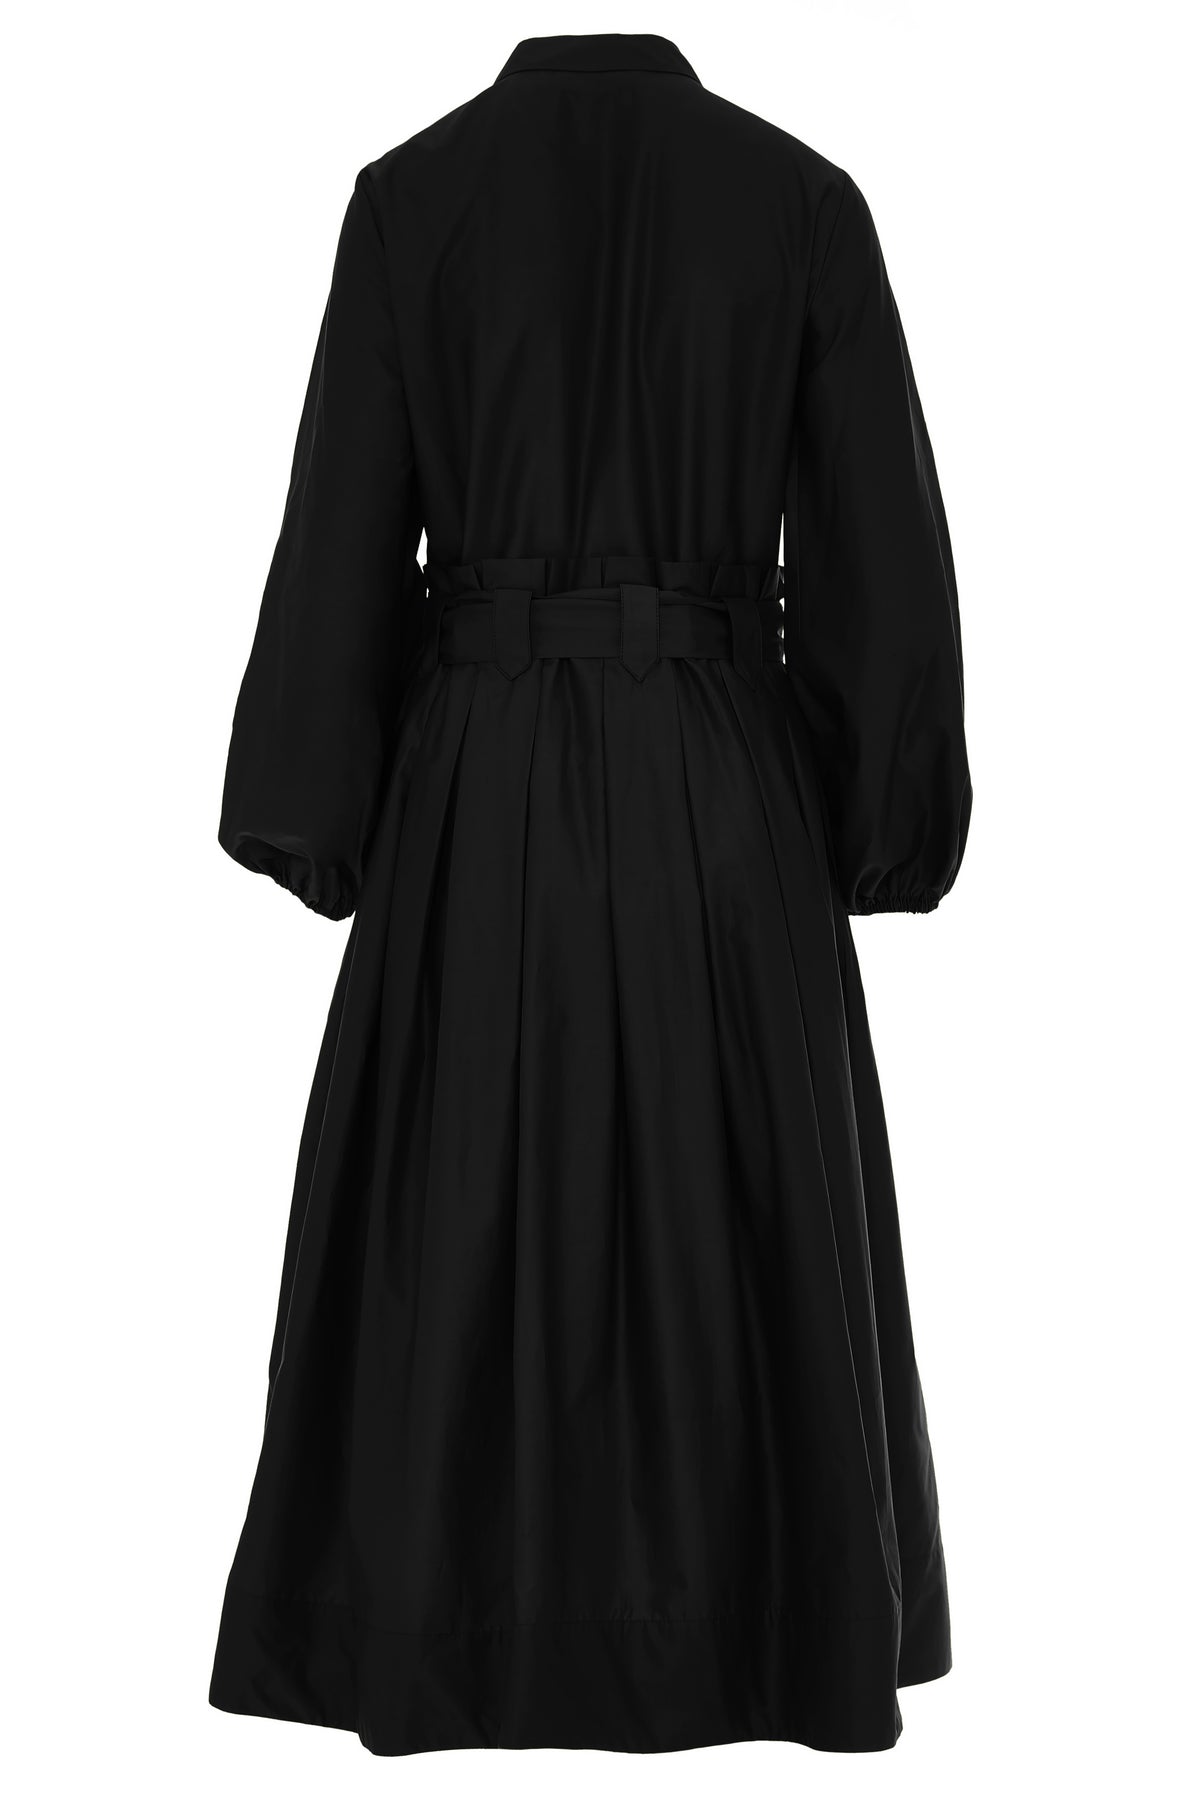 Black midi dress with half placket full skirt long sleeves collar and statement box pleats at waist and belt loops